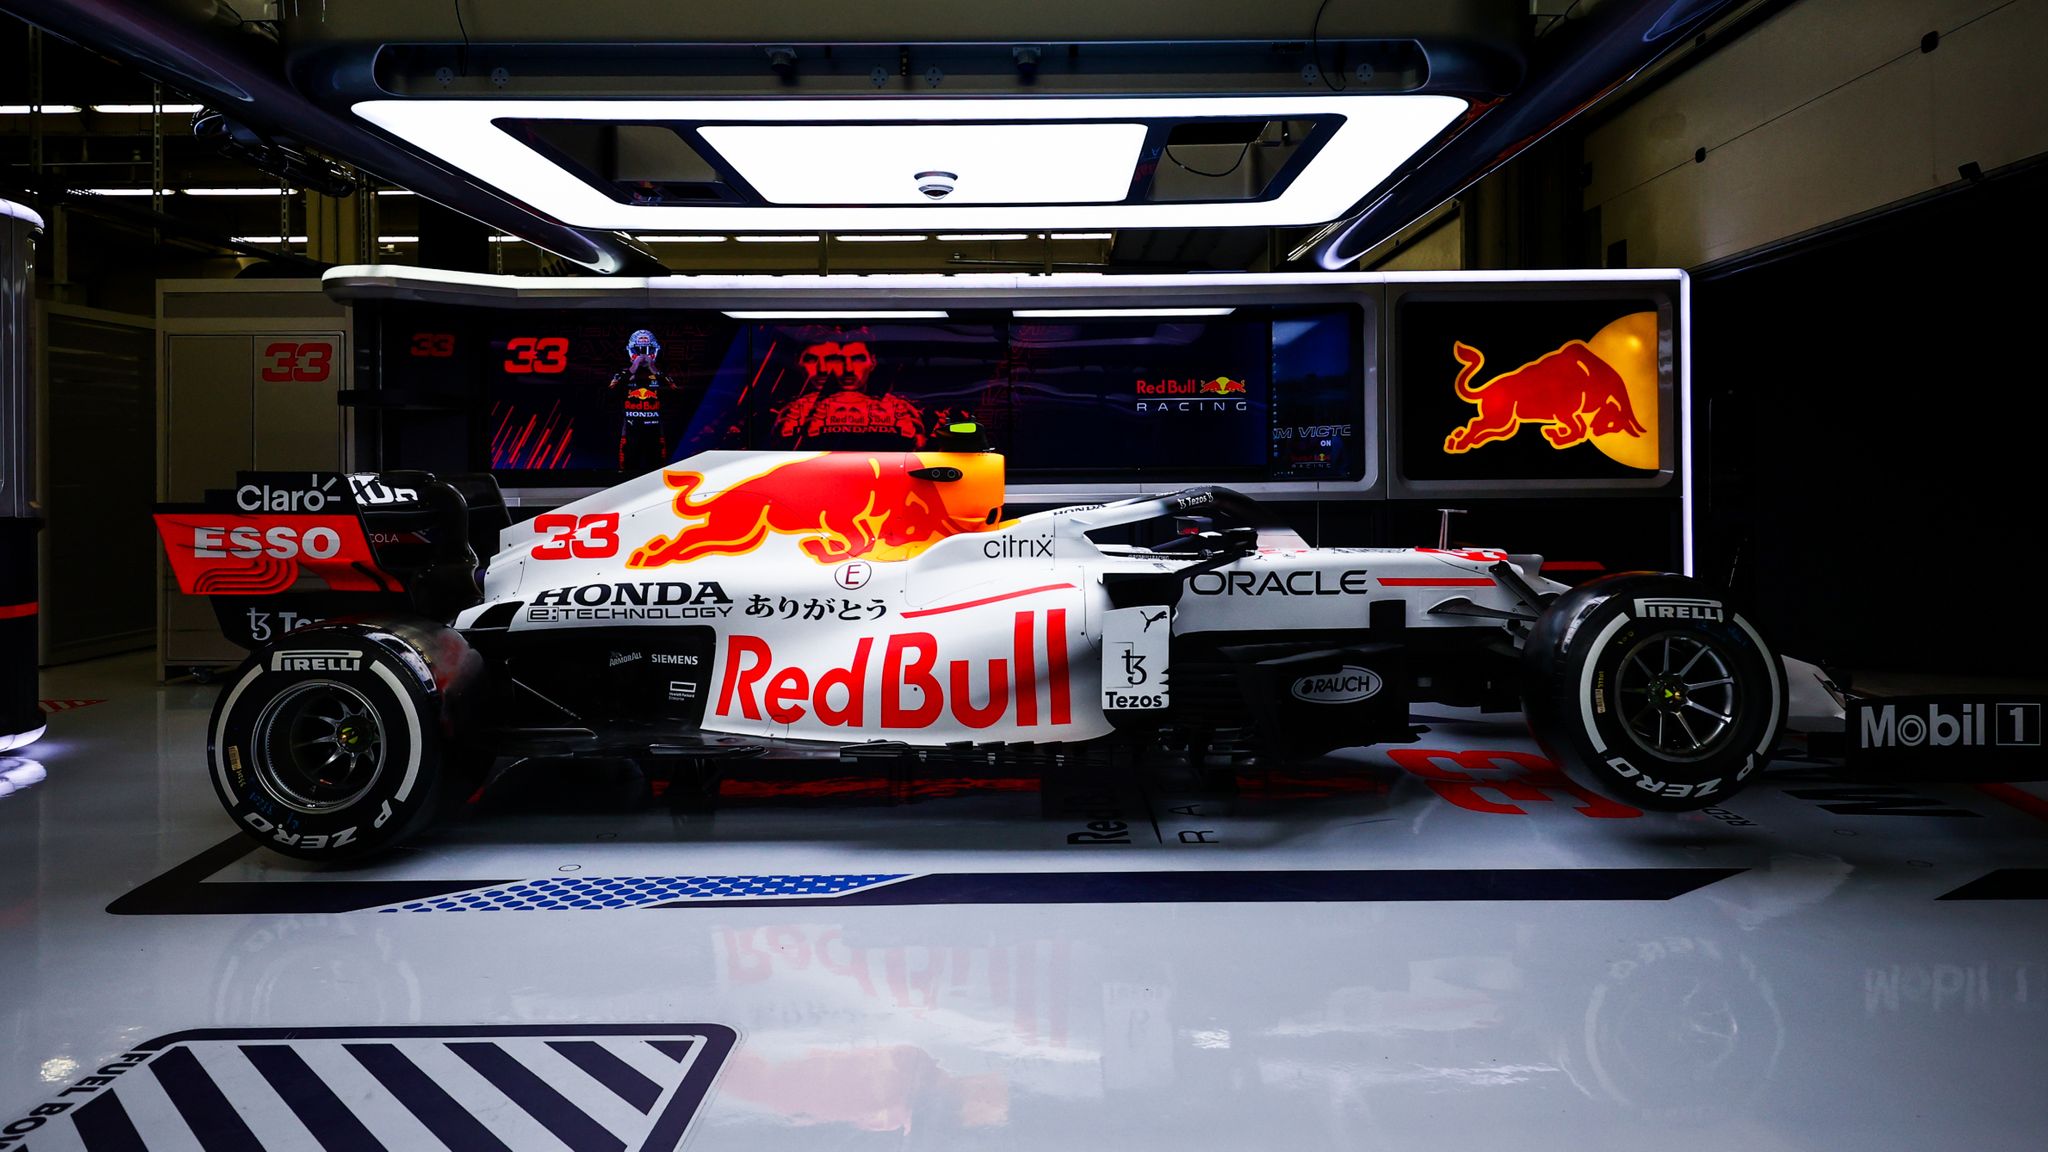 Turkish Gp Red Bull And Alphatauri To Race With Special Honda